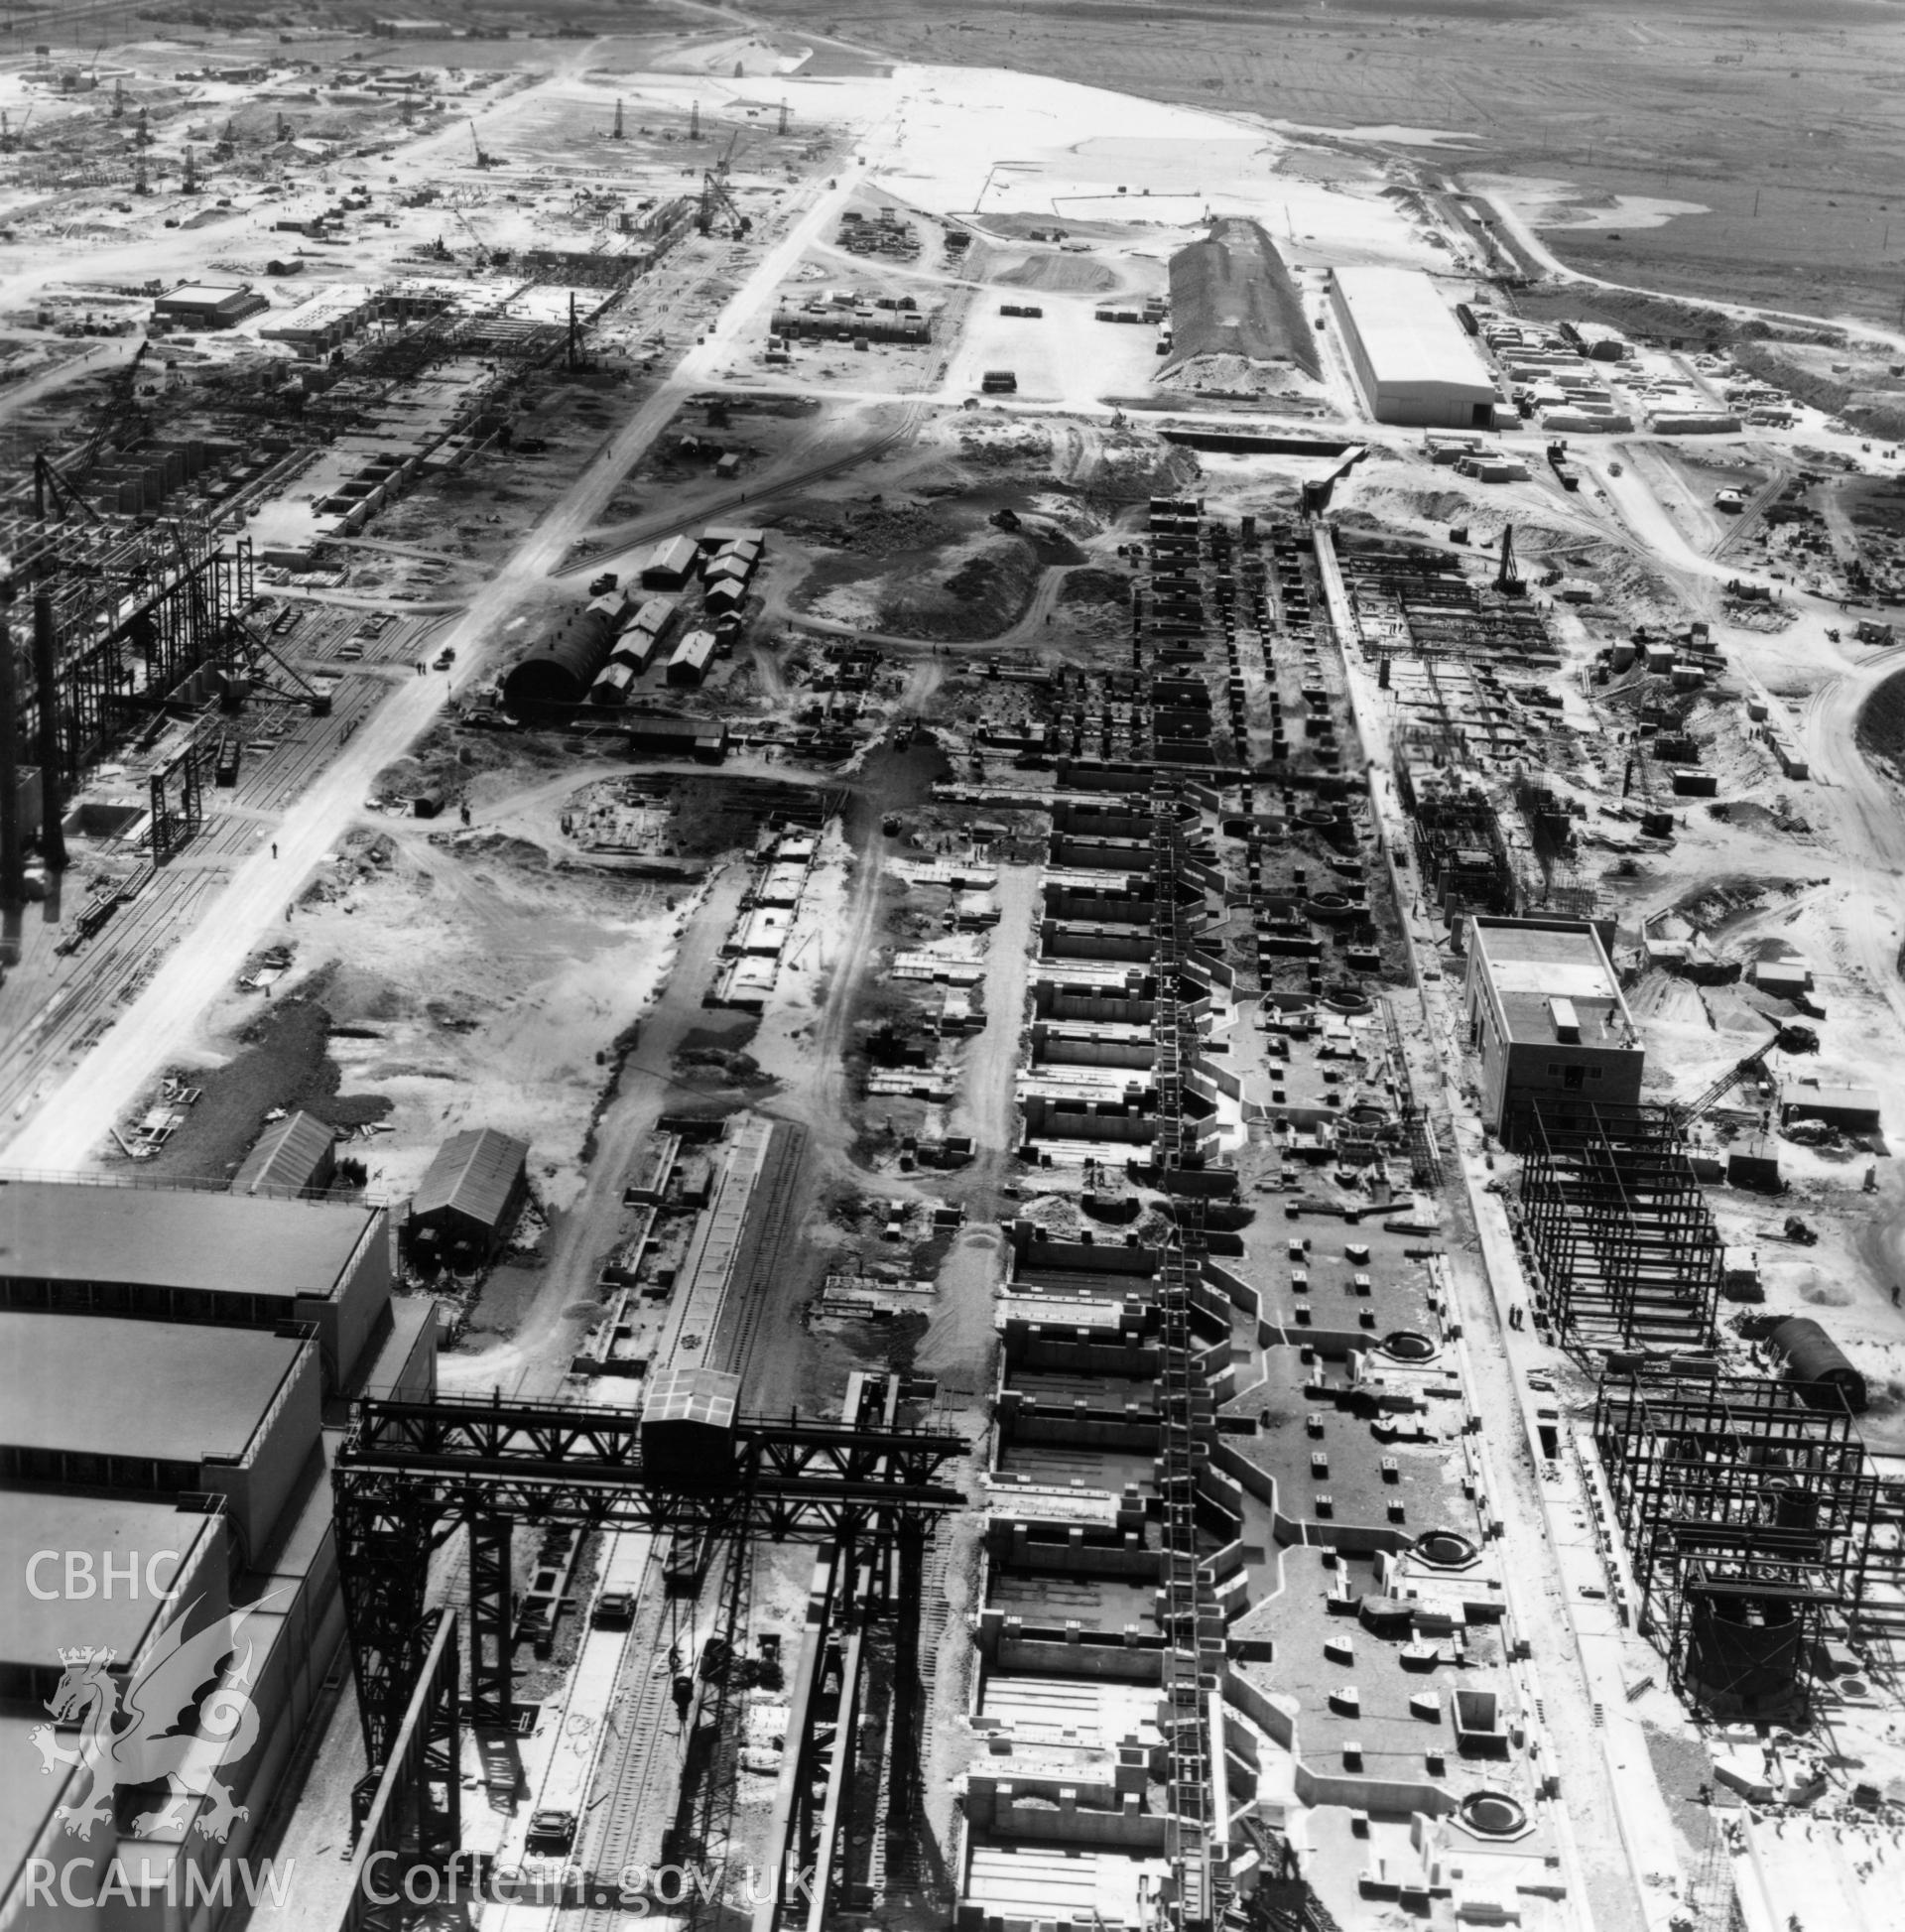 View of Abbey Steelworks, Port Talbot, under construction. Oblique aerial photograph, 5?" cut roll film.